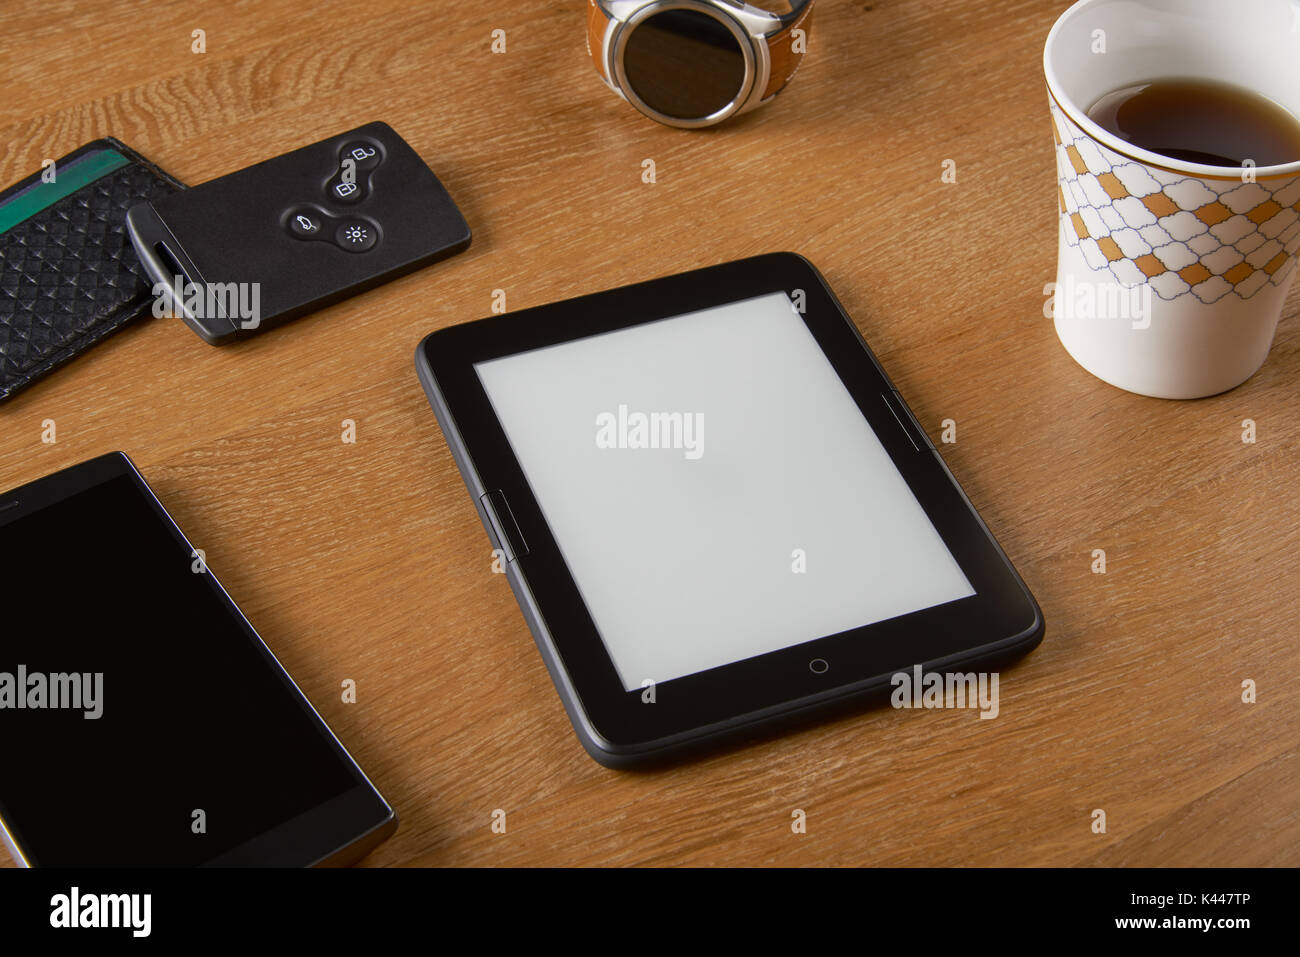 E-book device with Smart key, card wallet, smart watch, smart phone and a cup of coffee on a wooden table. The device is a dedicated device for readin Stock Photo